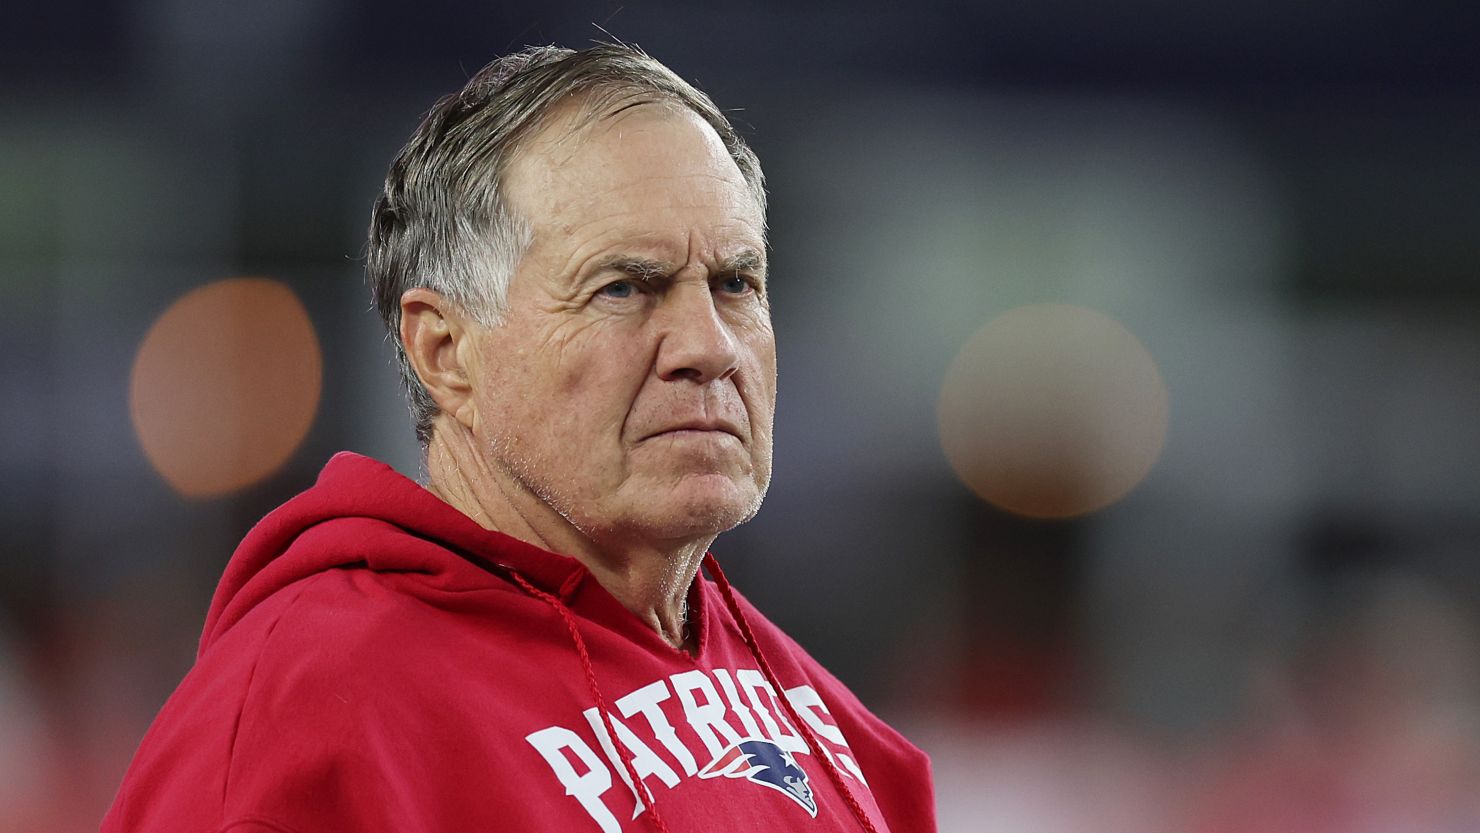 NFL's Coaching Carousel: The 49ers, Belichick, and the Quest for Excellence